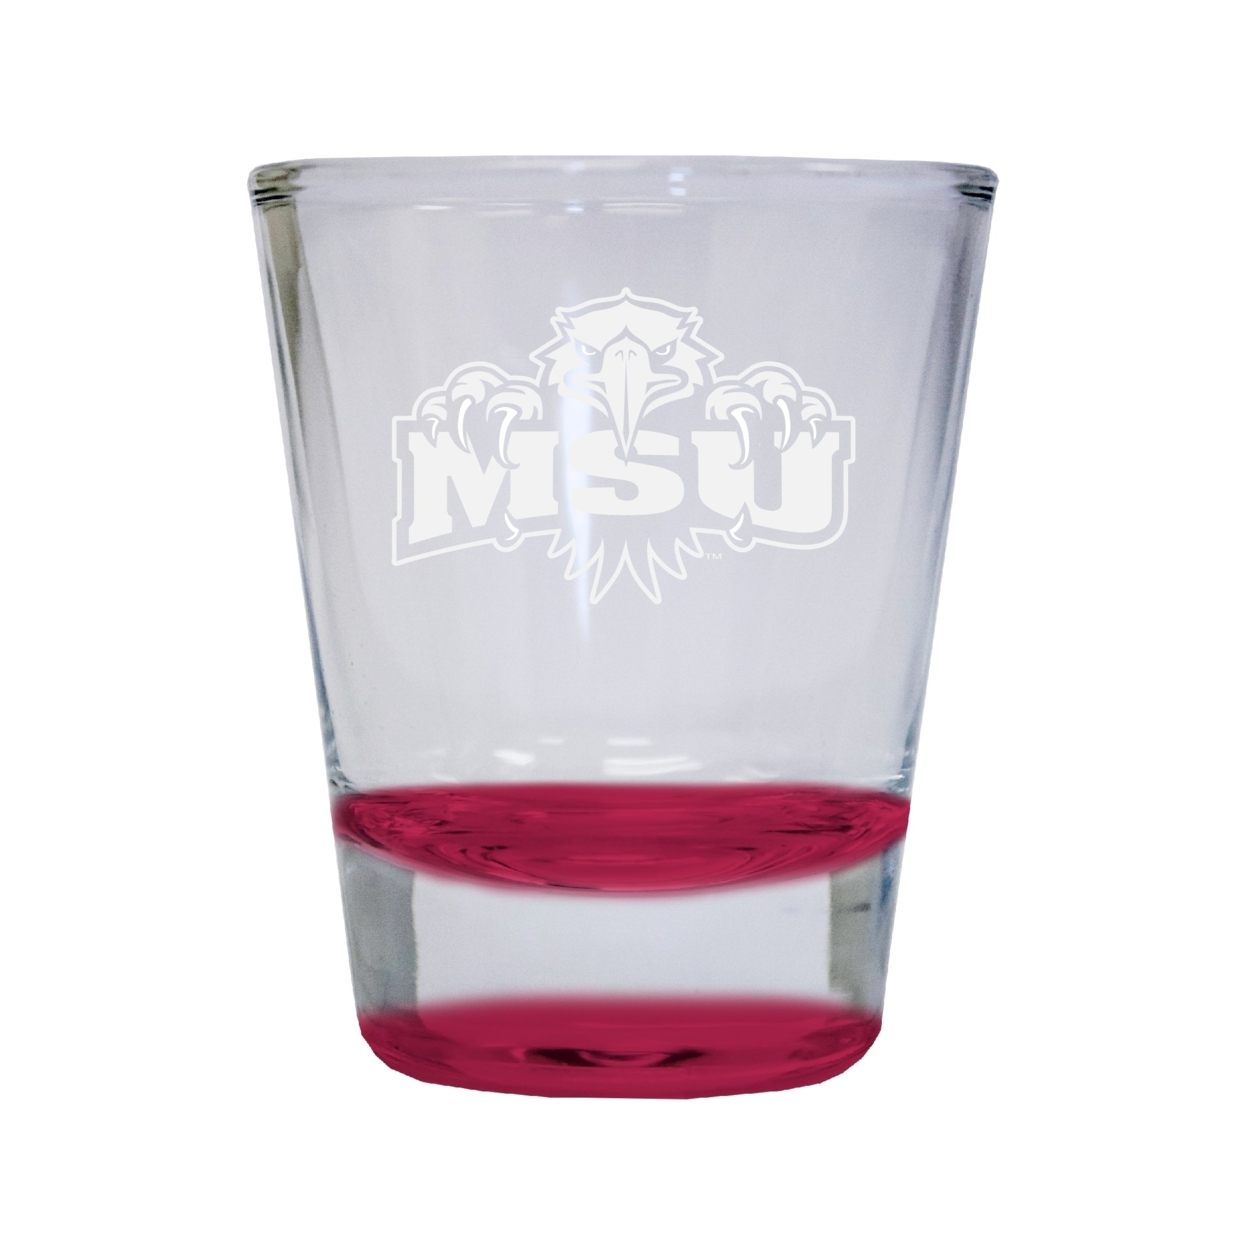 Morehead State University Etched Round Shot Glass 2 Oz Red